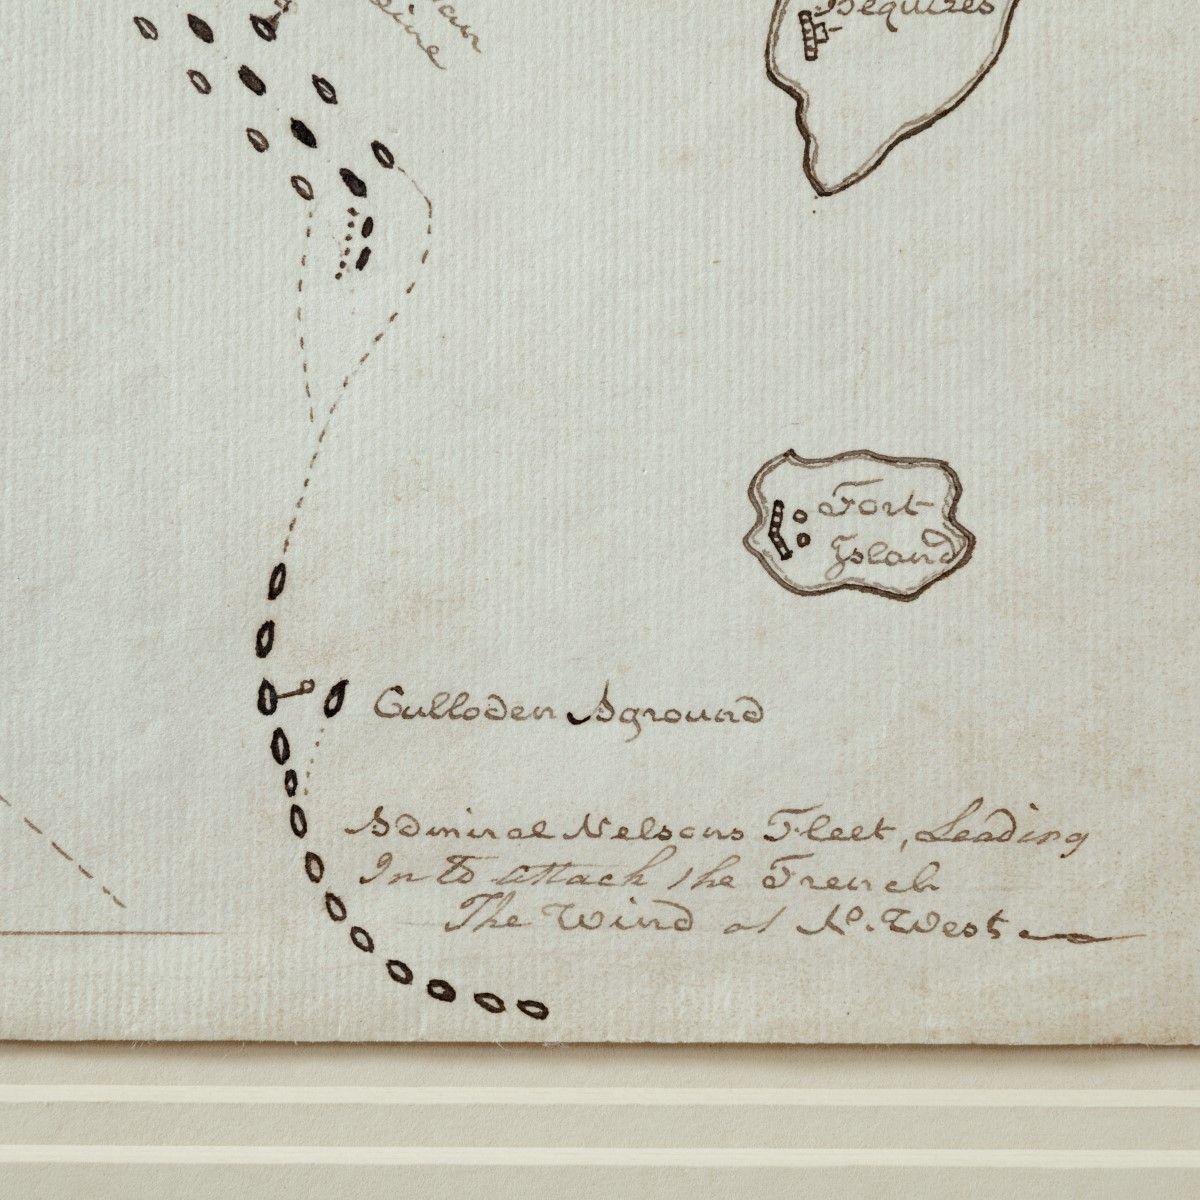 HMS Zealous Plan of the Battle of the Nile